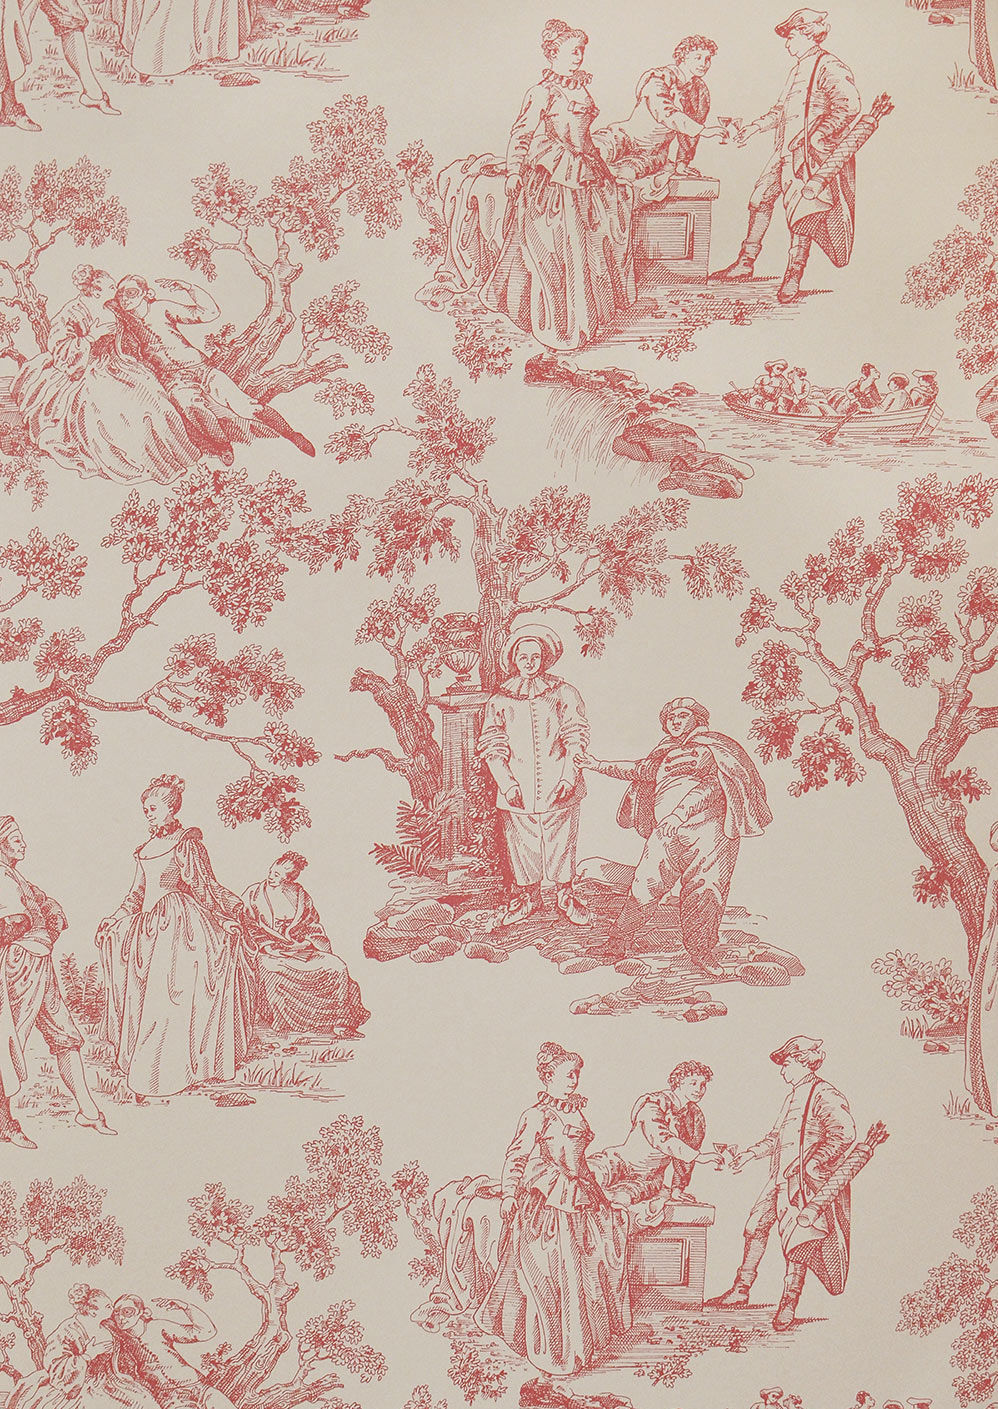 Vauxhall Gardens Fabric - Red - Lewis & Wood